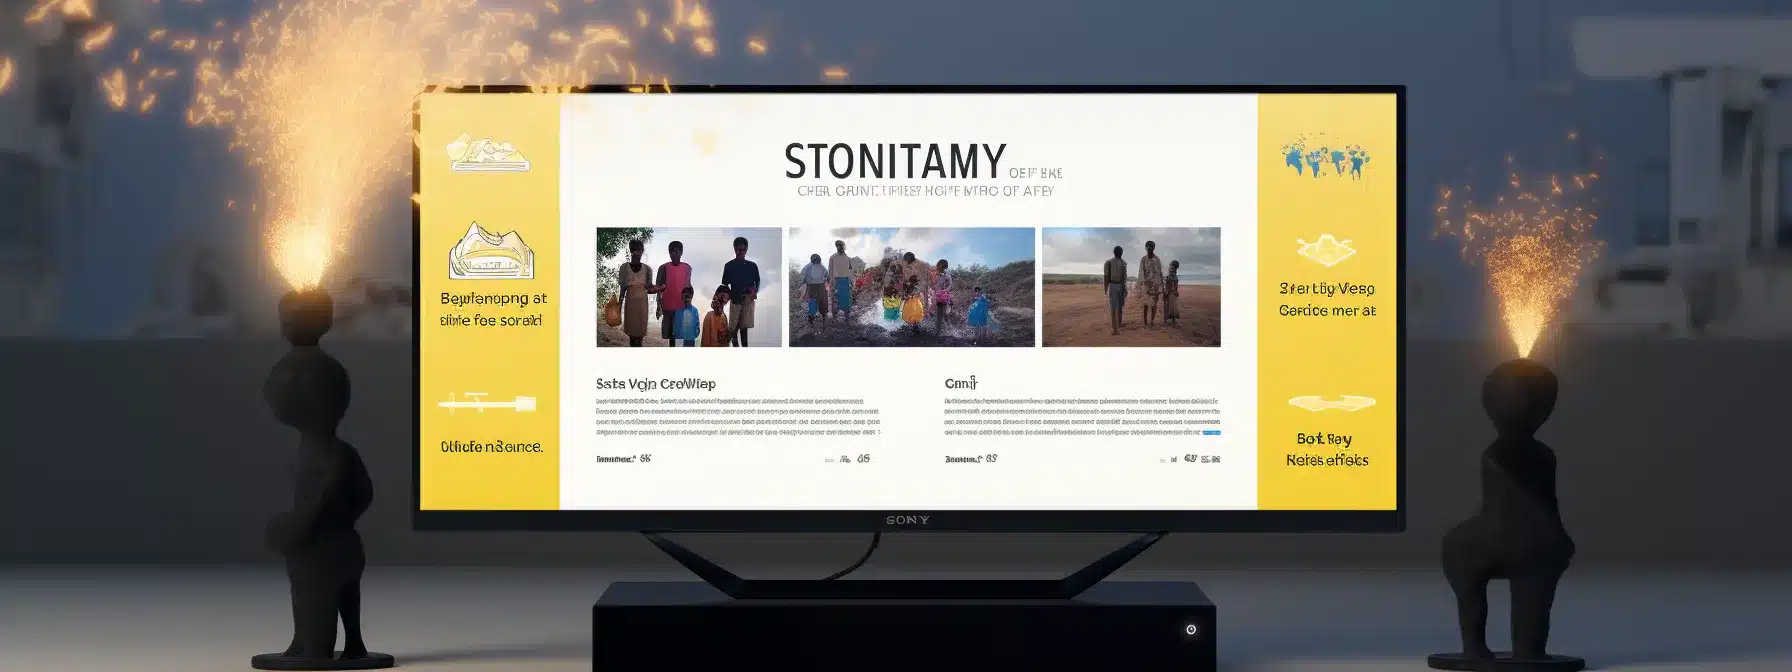 A Video Playing On A Digital Platform, With Infographics And Instagram Stories Surrounding It, While A Donation Pop-Up Appears, Creating An Engaging And Interactive Storytelling Experience.